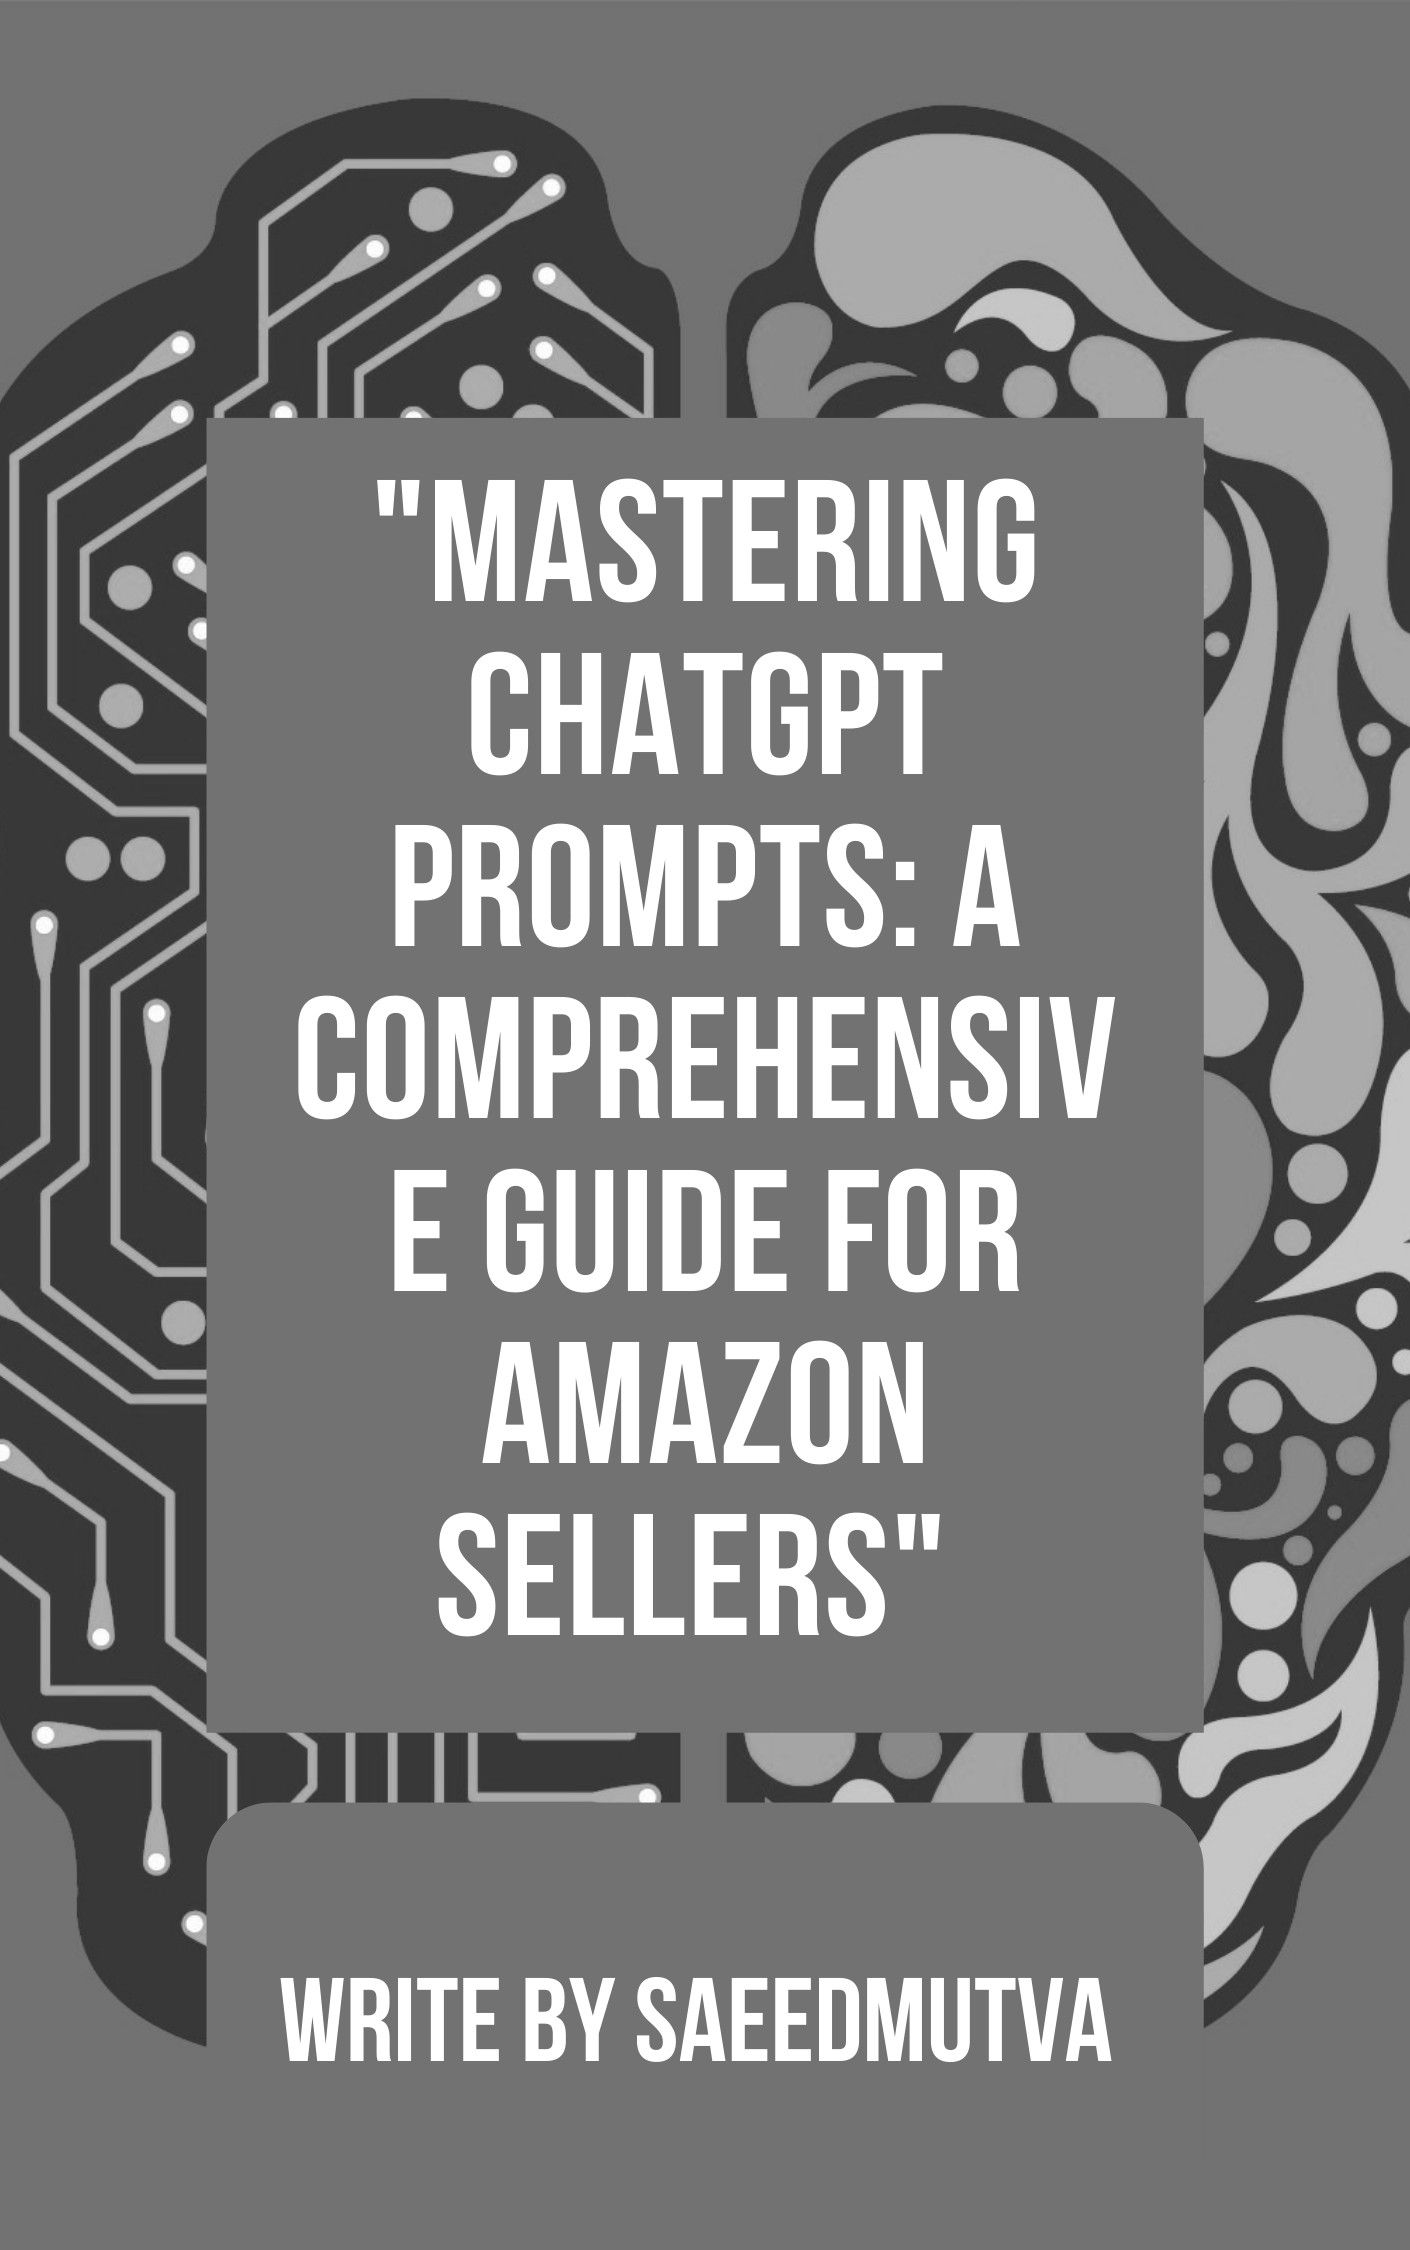 "Mastering chat Gpt prompts a comprehensive e guide for Amazon seller "